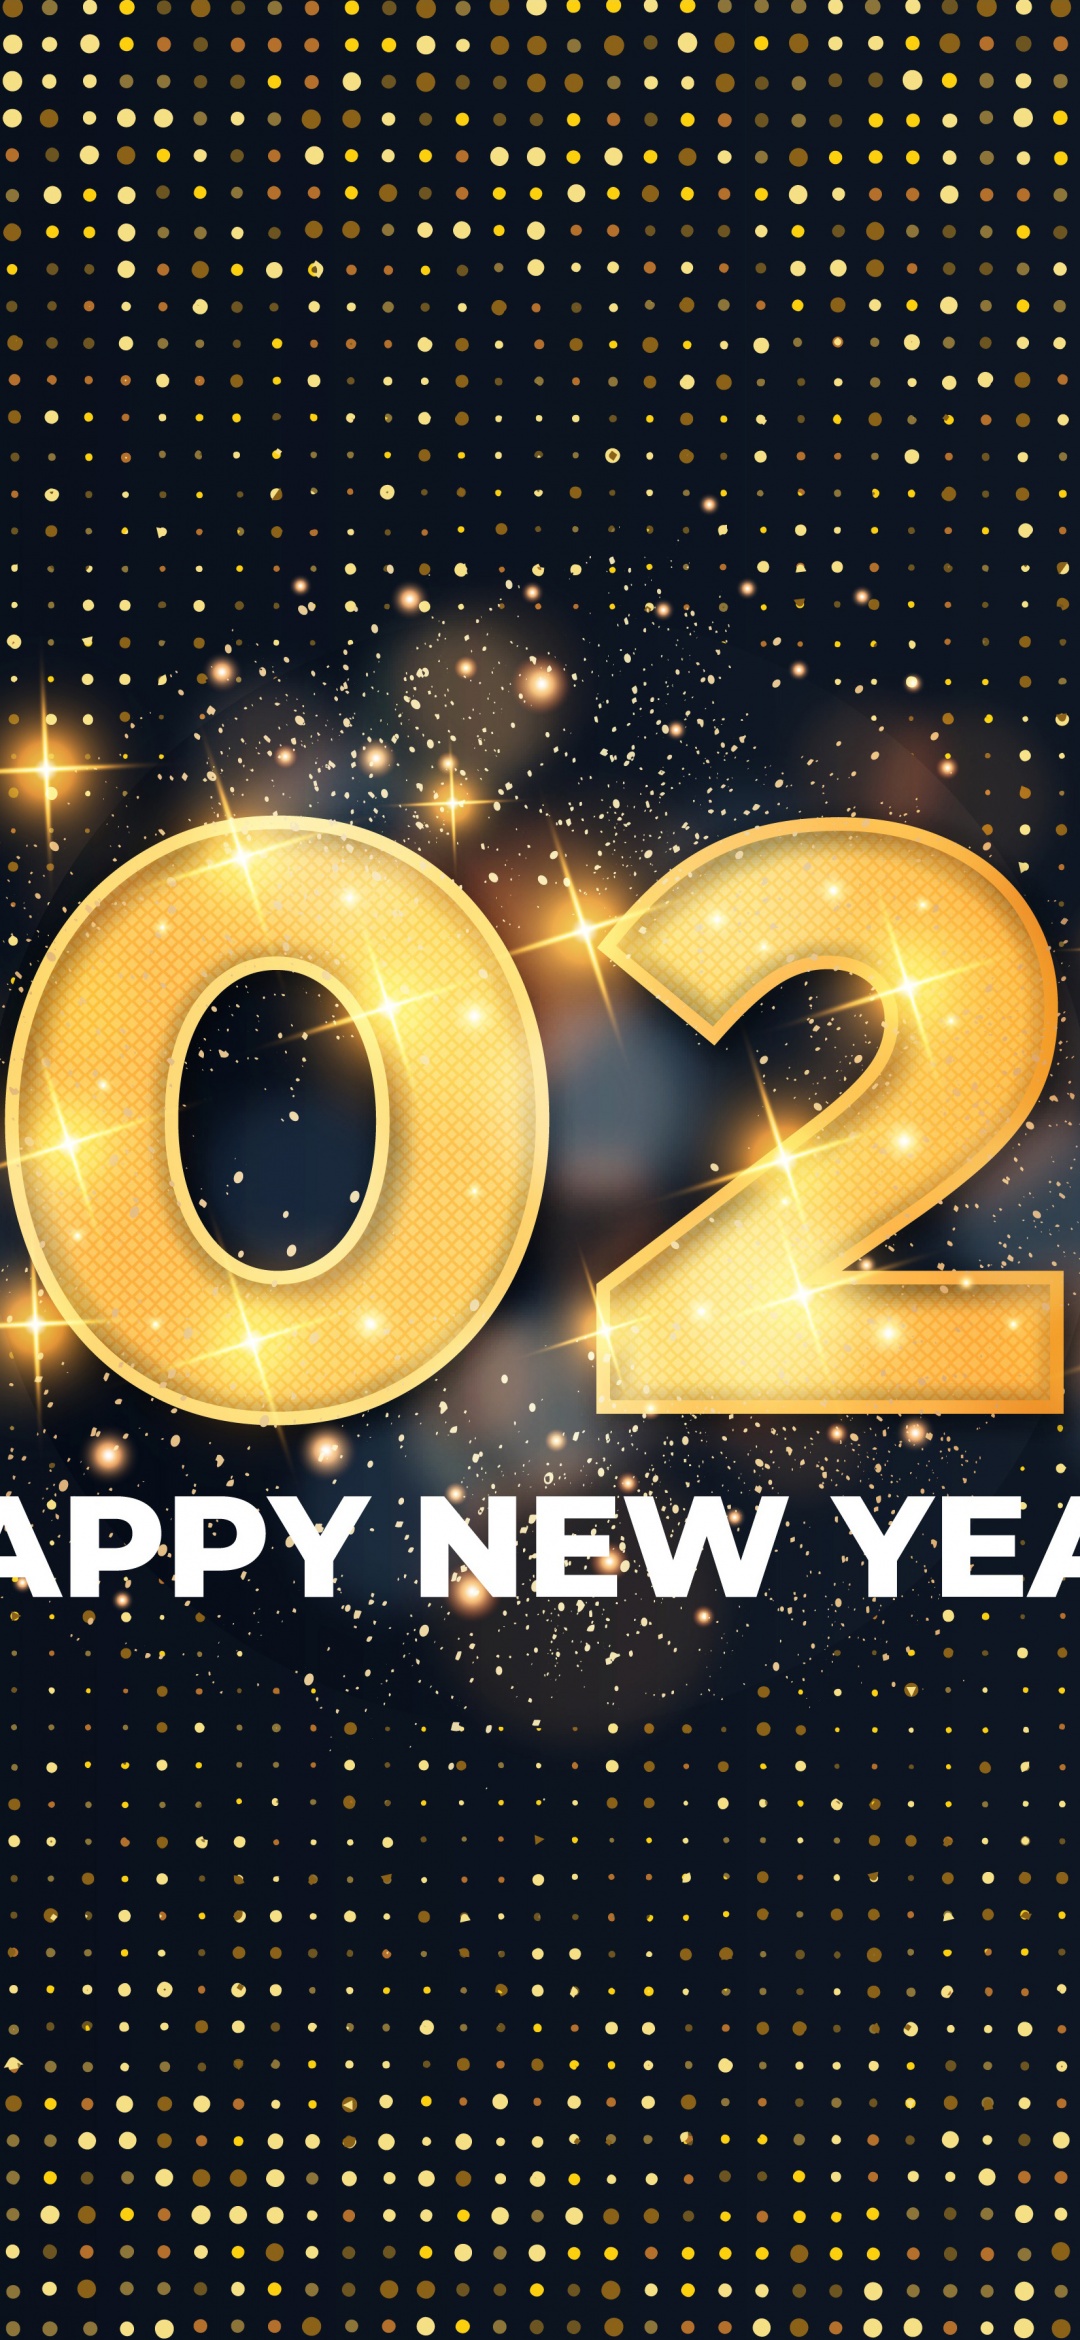 40 New Years Wallpaper Designs To Download Free  New years eve wallpaper  Happy new year wallpaper New year wallpaper